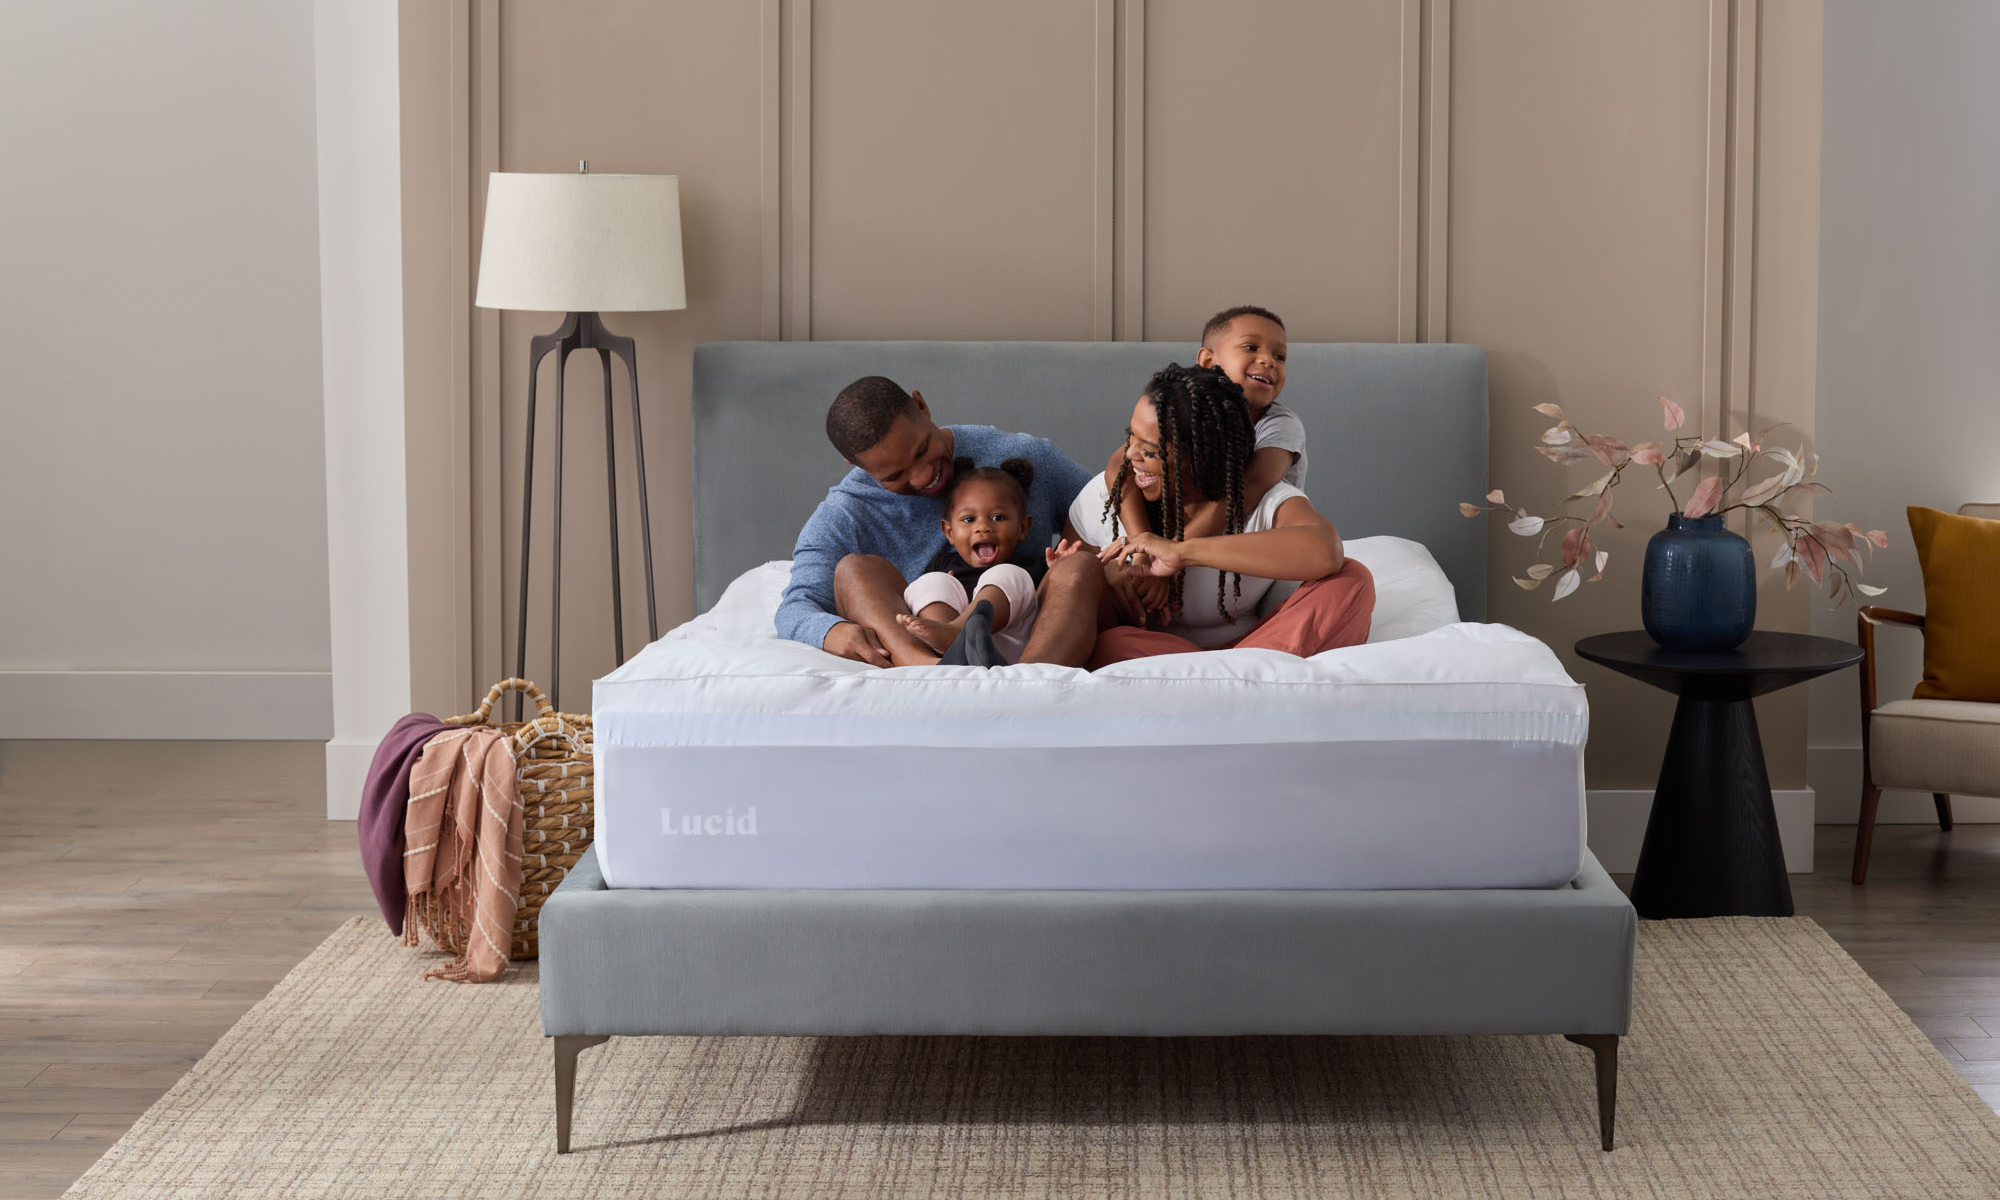 family sitting on Lucid mattress together